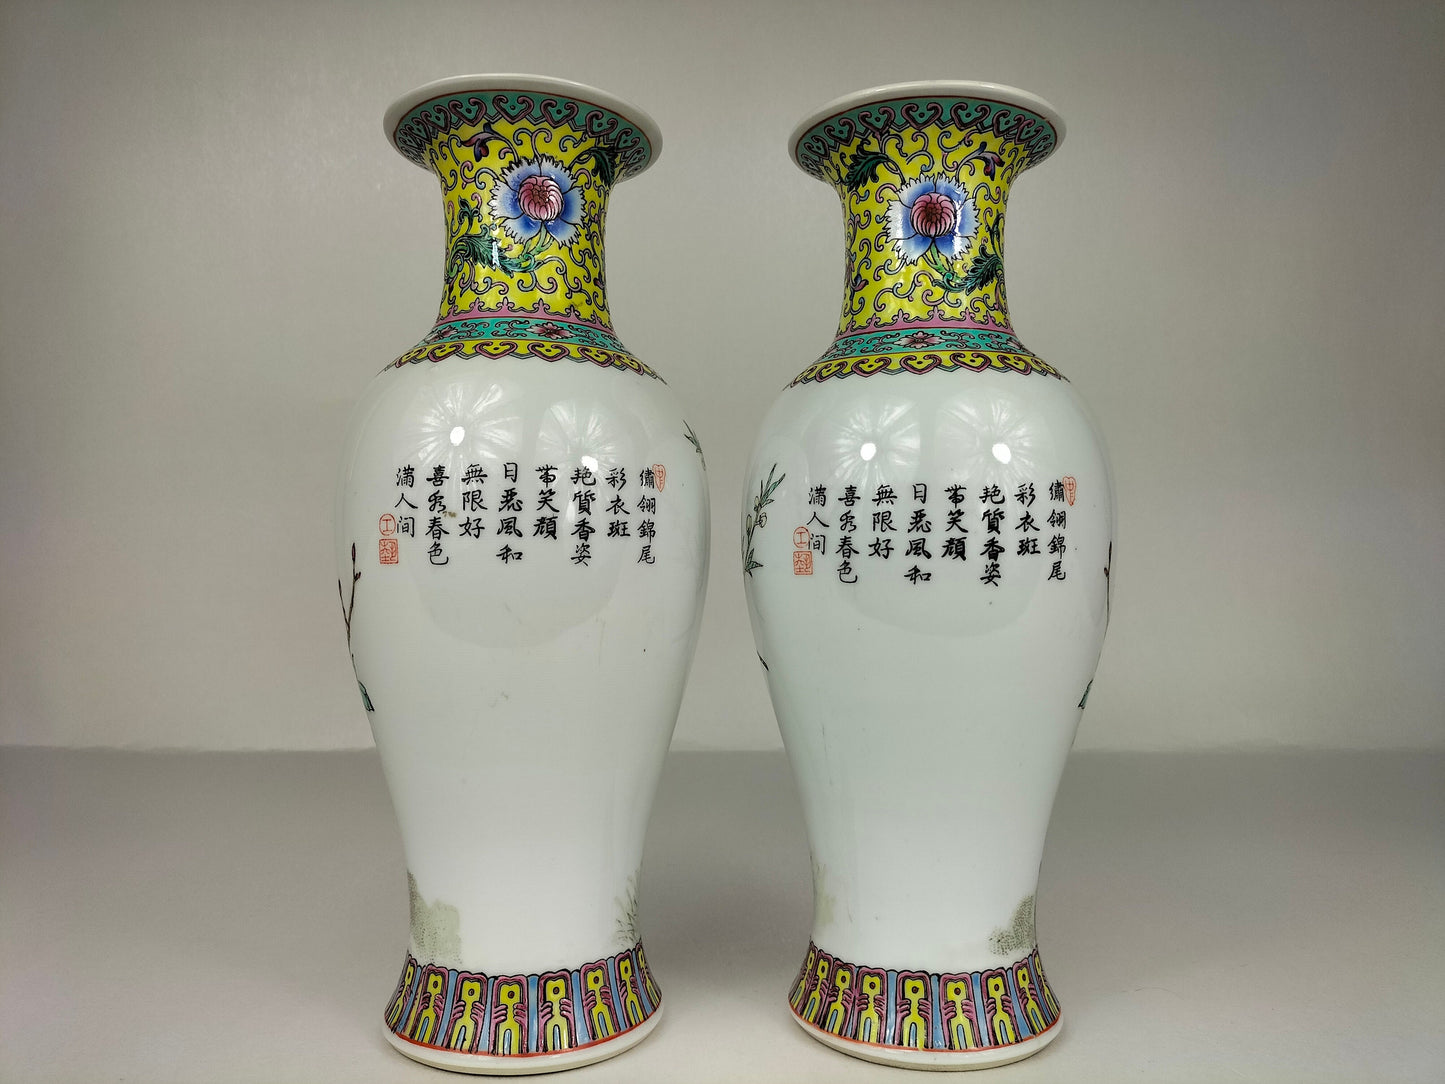 Pair of Chinese famille rose vases decorated with flowers and birds // Jingdezhen - 20th century